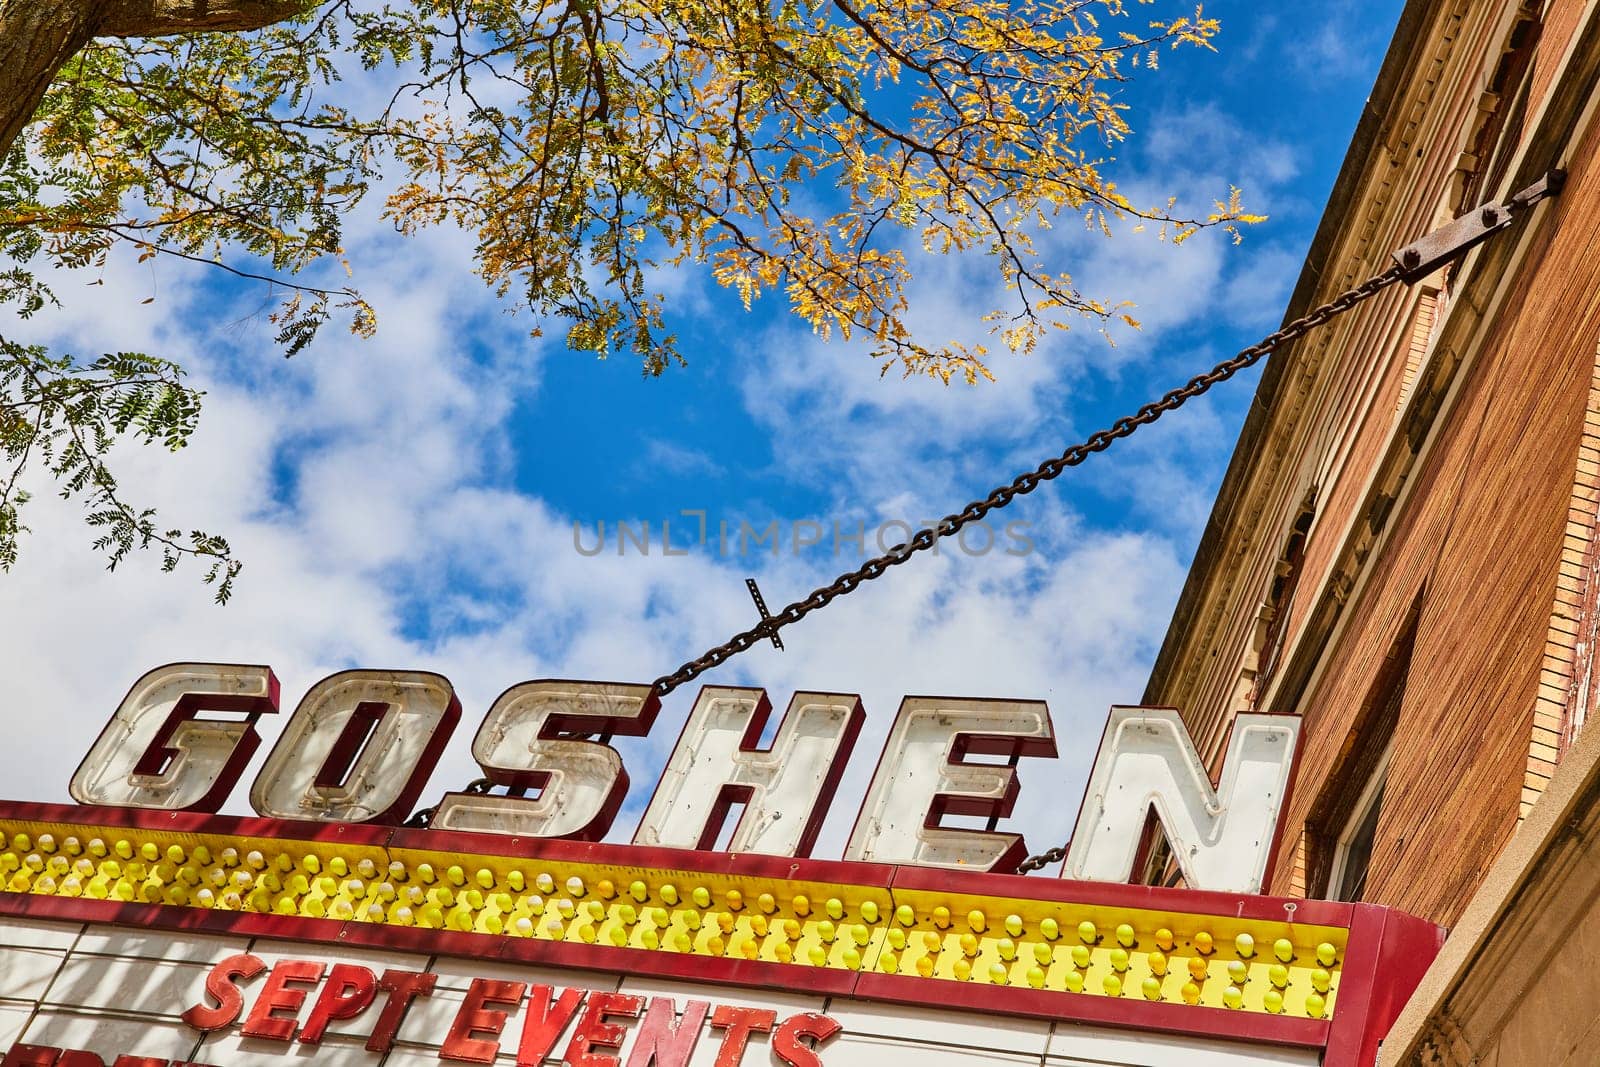 Image of Goshen theater sign on bright, sunny summer day with blue sky and white clouds, Indiana